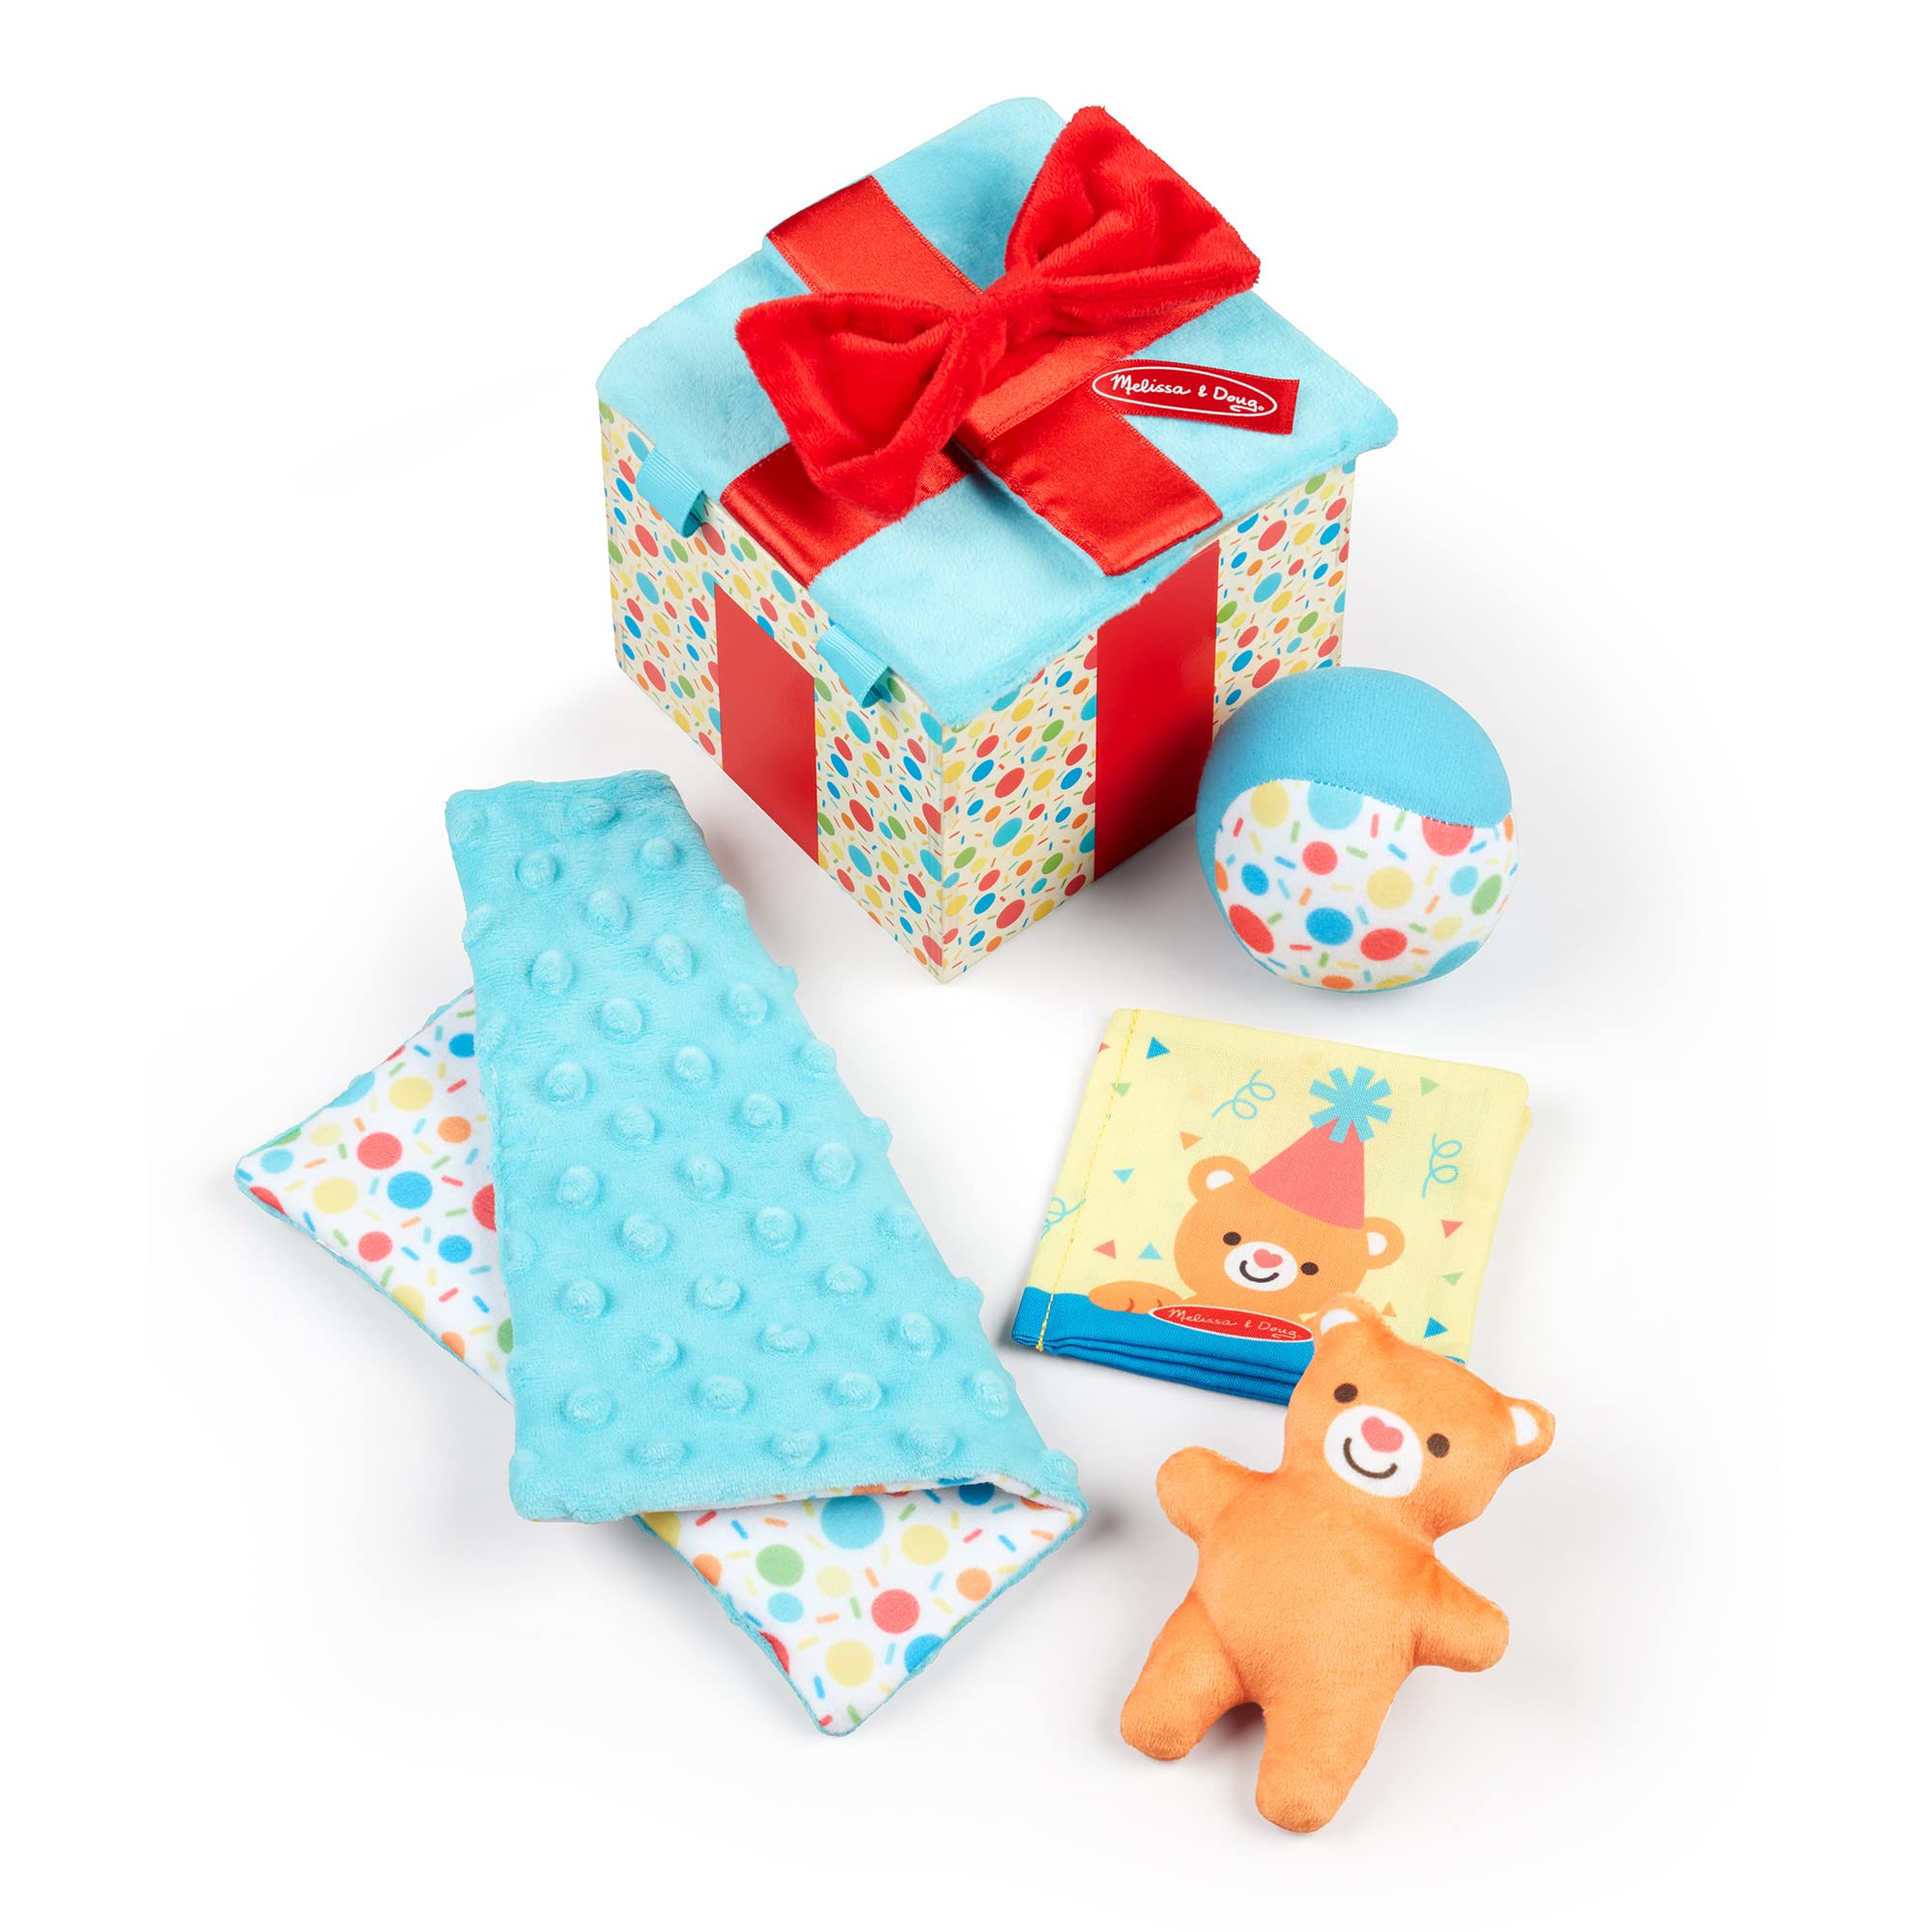 5-Piece Melissa & Doug Wooden Baby Toy Surprise Gift Box $7.36 + F/S w/ Prime or on Orders $35+